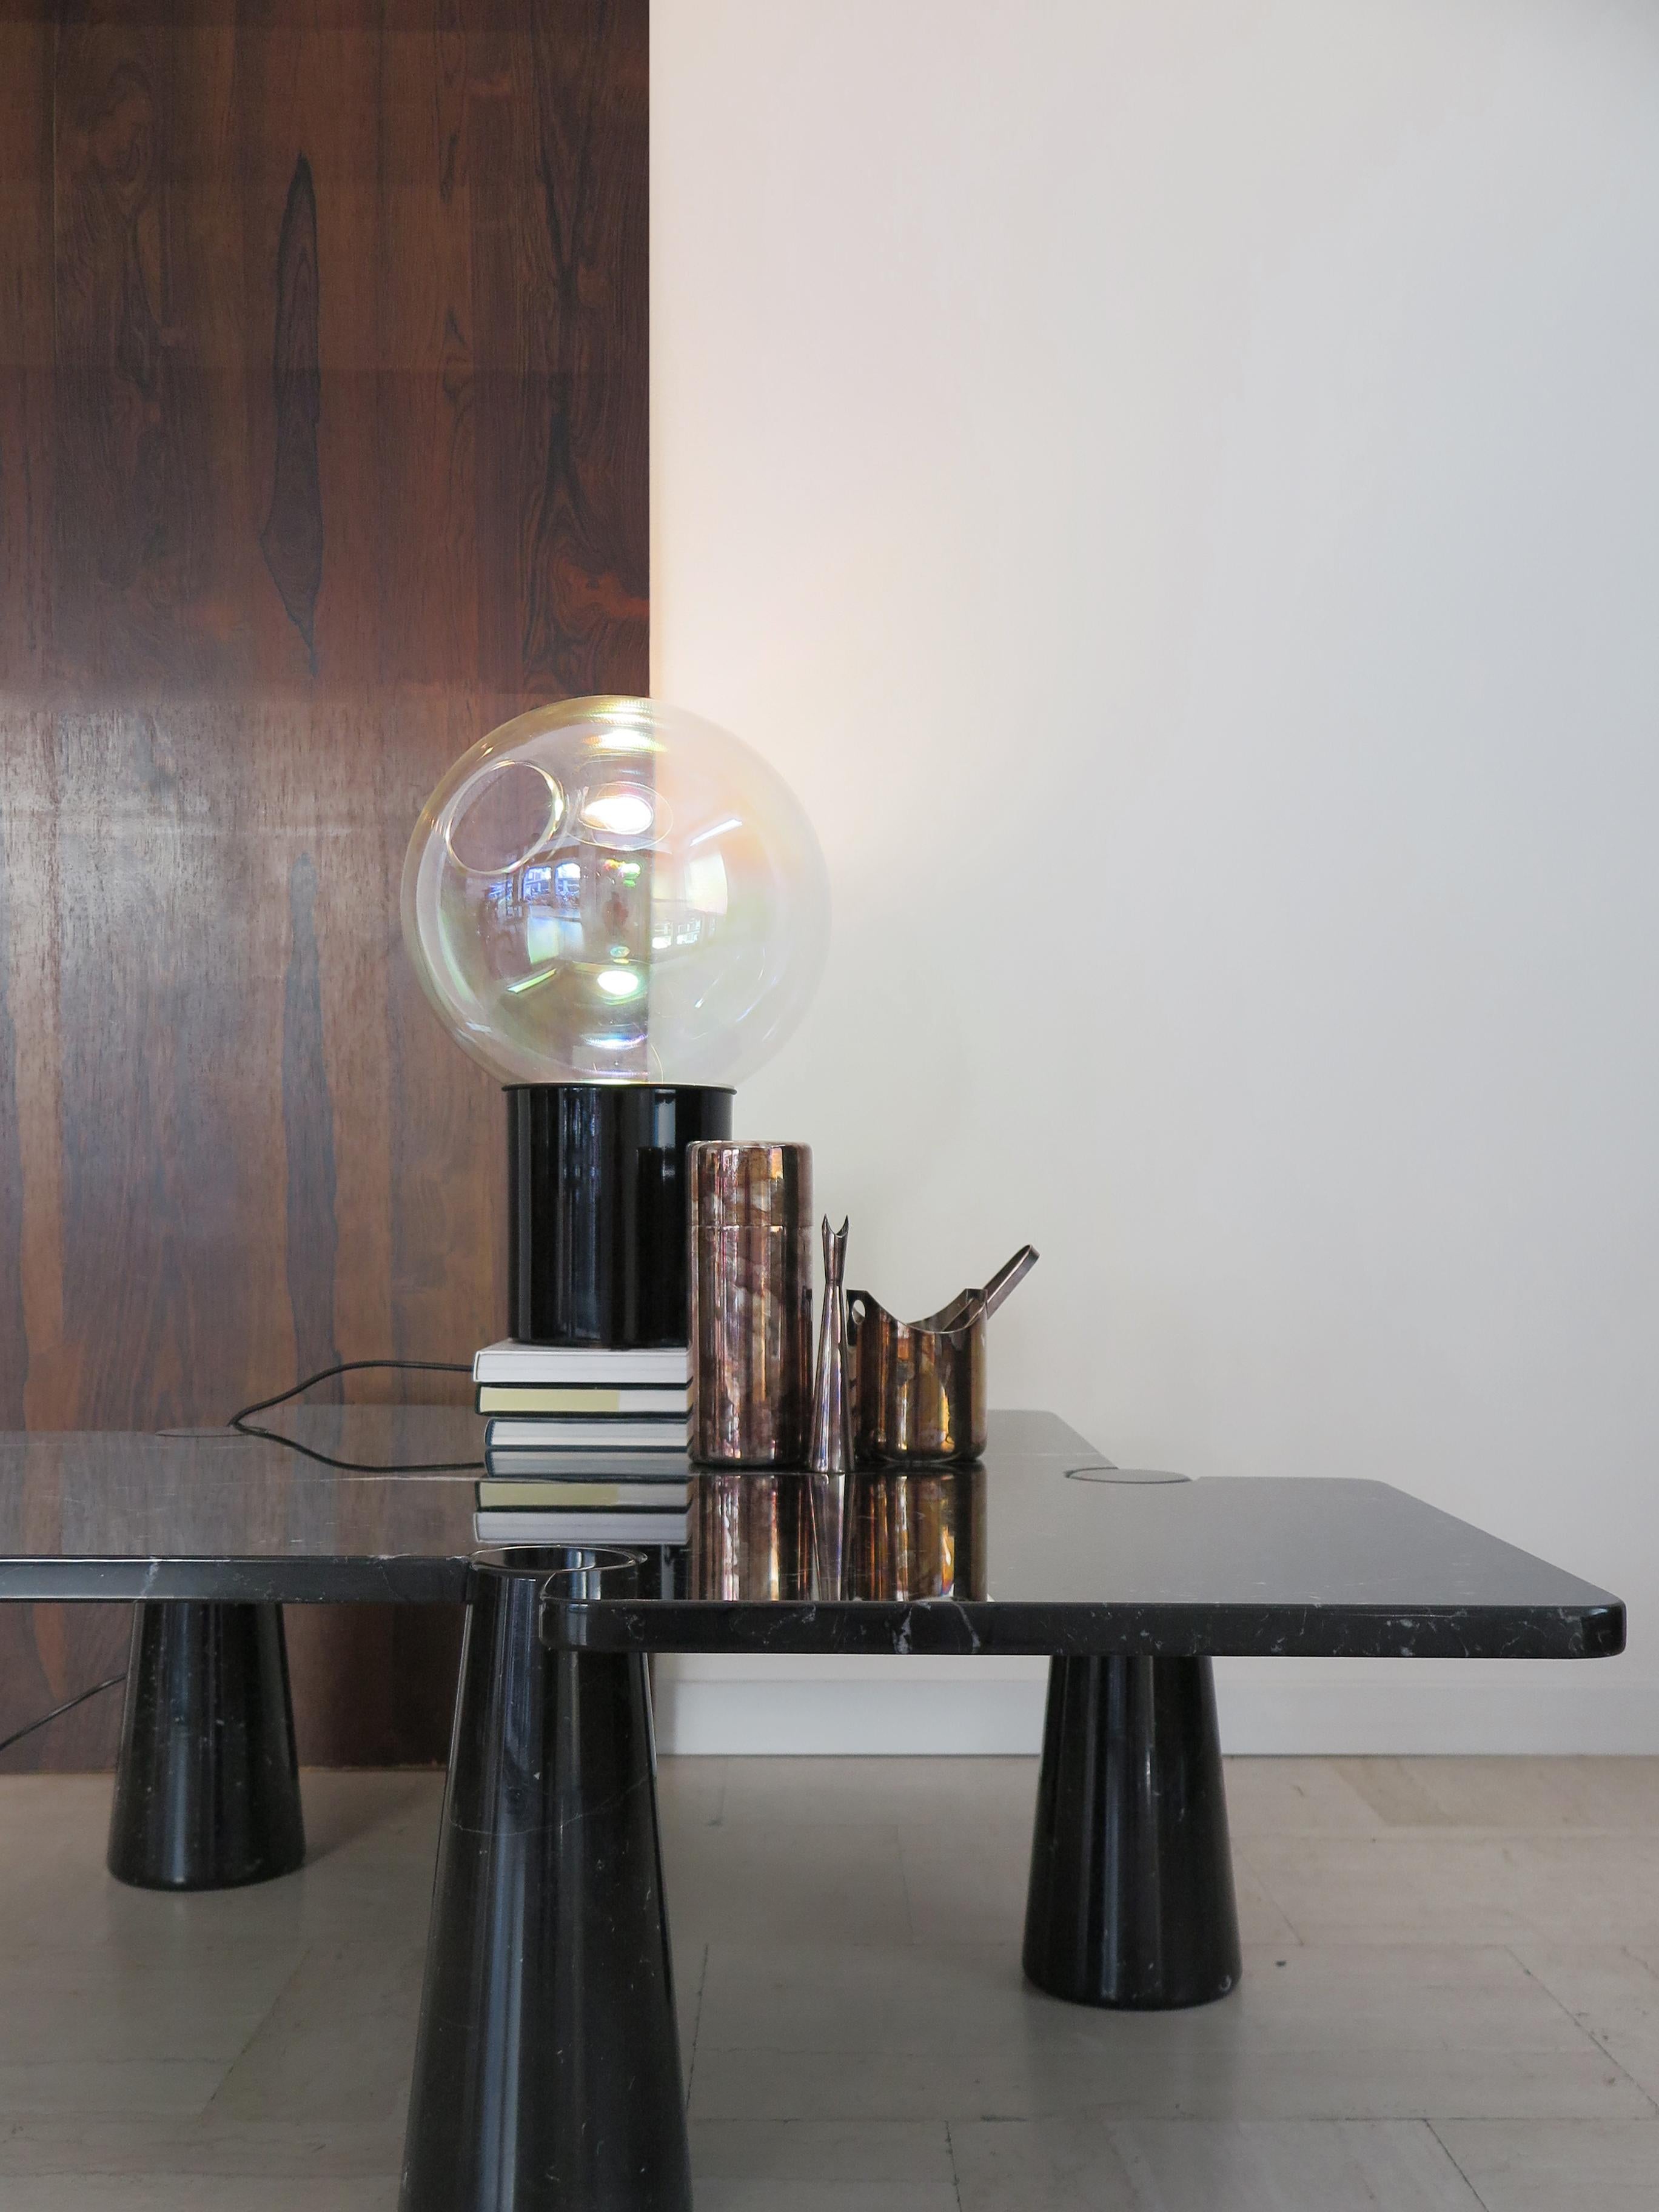 Italian coffee table or sofa table, Eros series model Freccia, in Black Marquinia Marble designed by Angelo Mangiarotti for Skipper, marble elements embedded in dry, Italy 1970s.

This large table of minimal and contemporary design is perfect for